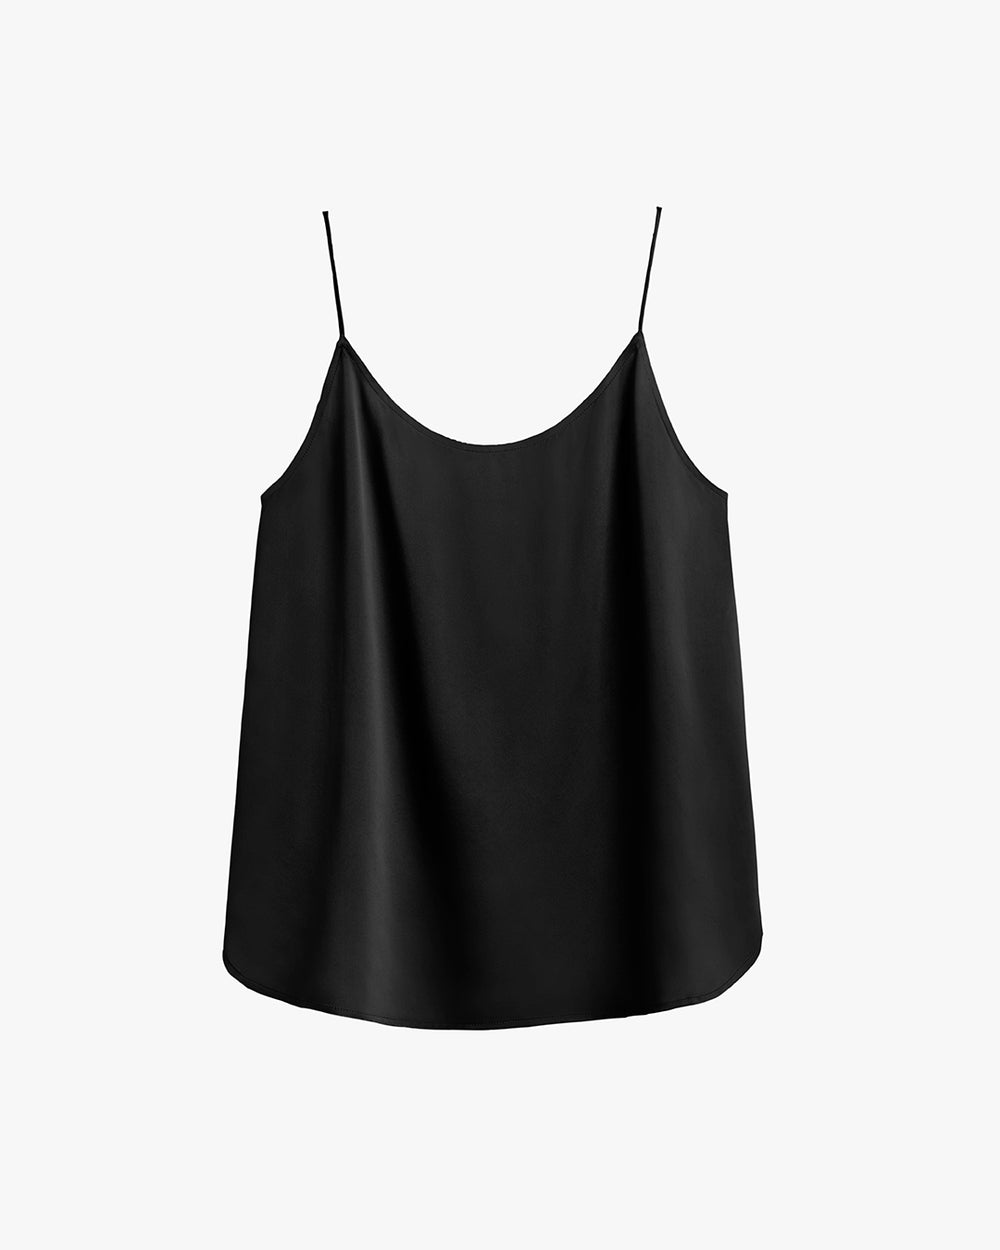 Sleeveless top with thin straps and a round neckline.